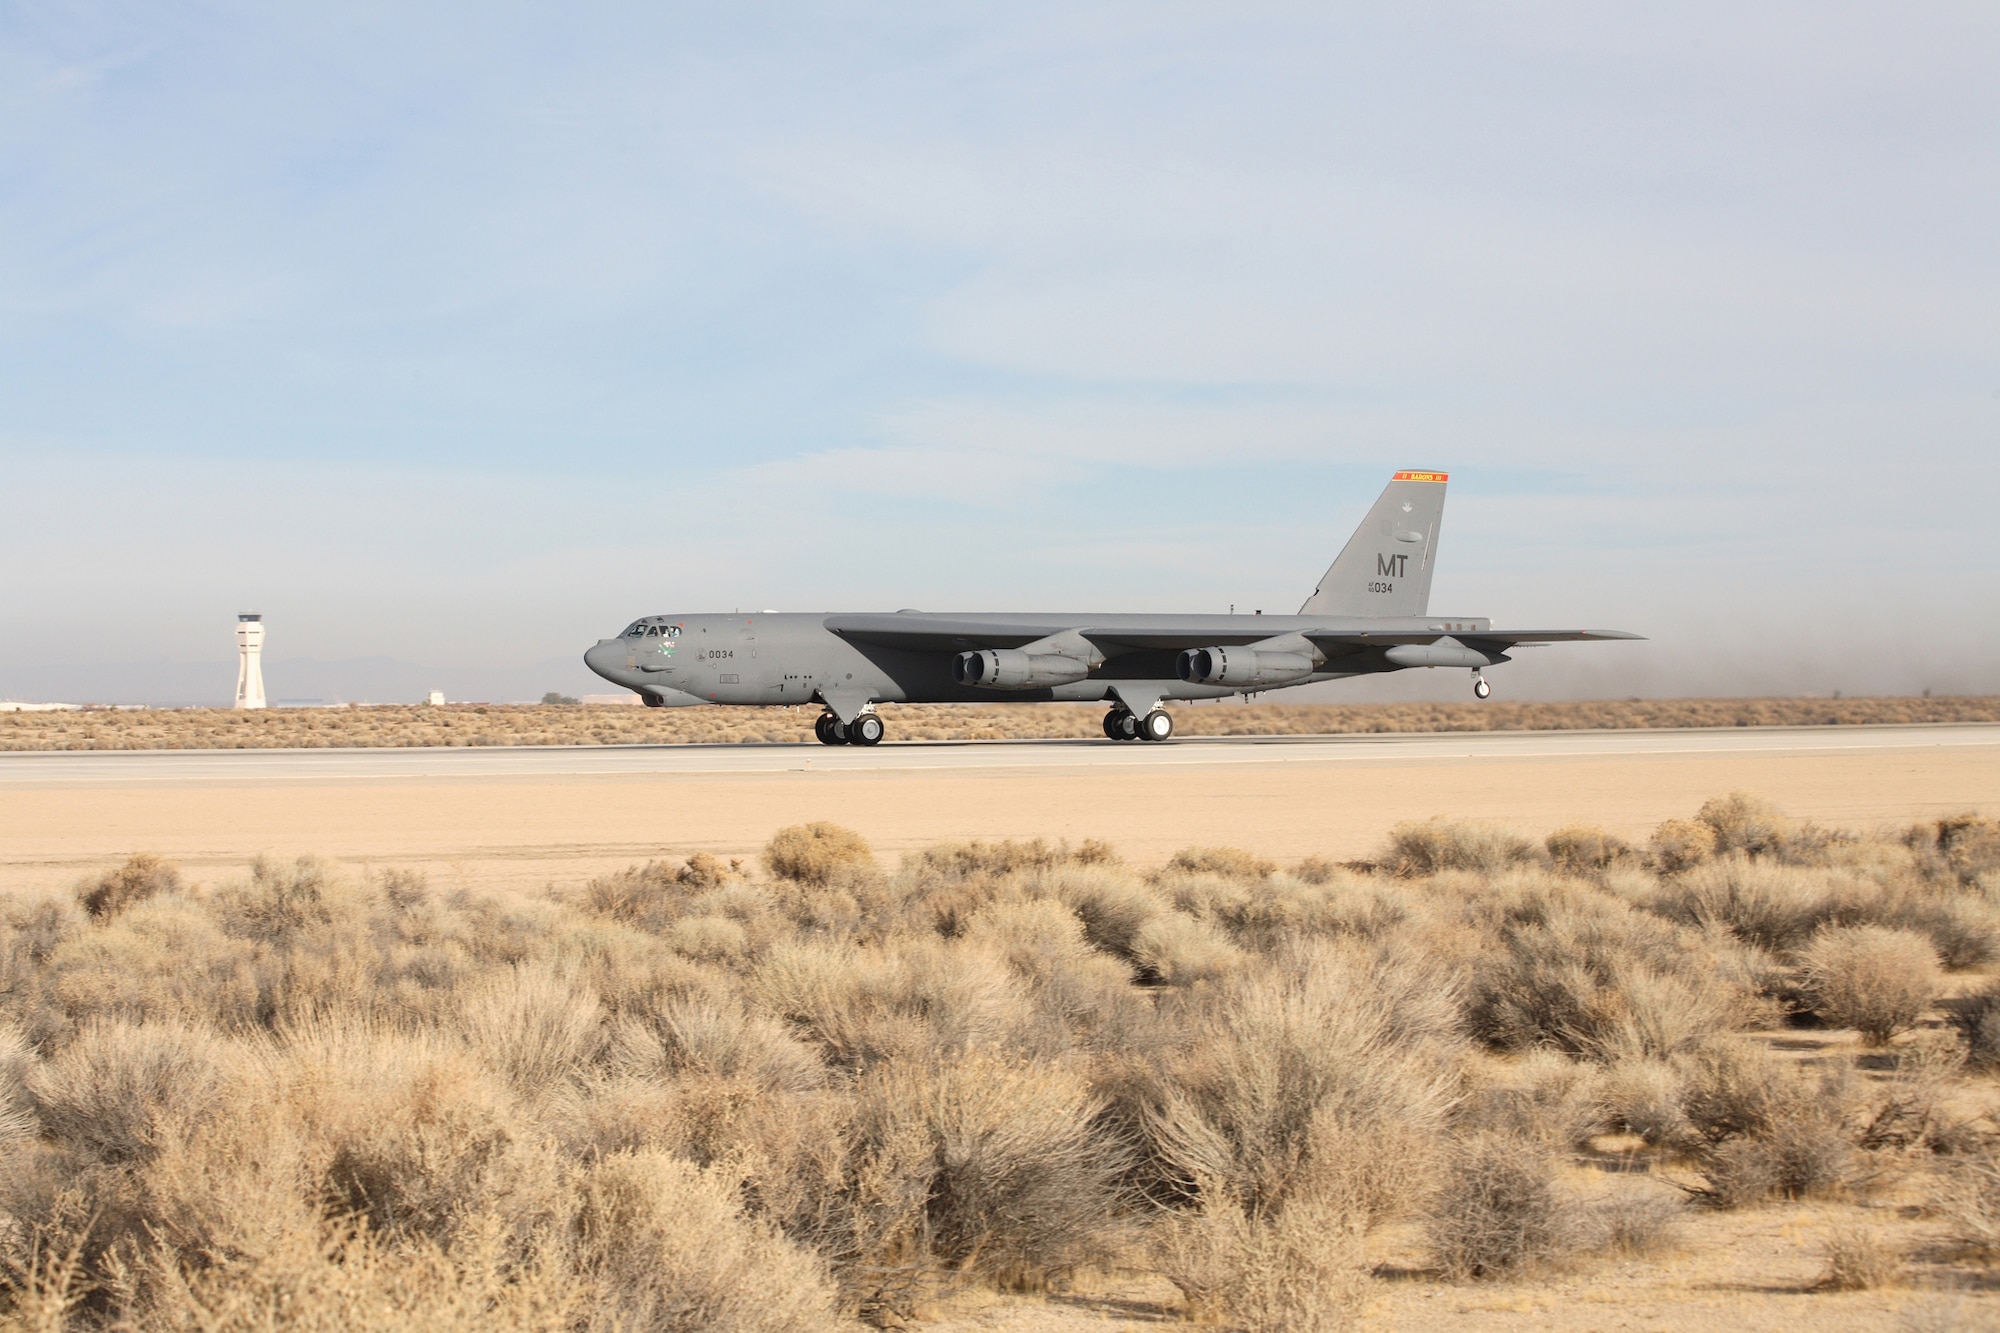 A B-52 Stratofortress accelerates down the runway at Edwards Air Force Base, Calif., Dec. 15 during take-off for a flight-test mission using a blend of synthetic fuel and JP-8 in all eight engines.  This is the first time a B-52 has flown using a synfuel-blend as the only fuel on board.  In September, the Air Force successfully flew a B-52 with two-engines using the synfuel-blend while the others used standard fuel. The B-52 test flights at Edwards are the initial steps in the Air Force process to test and certify a synthetic blend of fuel for its aviation fleet. (U.S. Air Force photo/Jet Fabara)